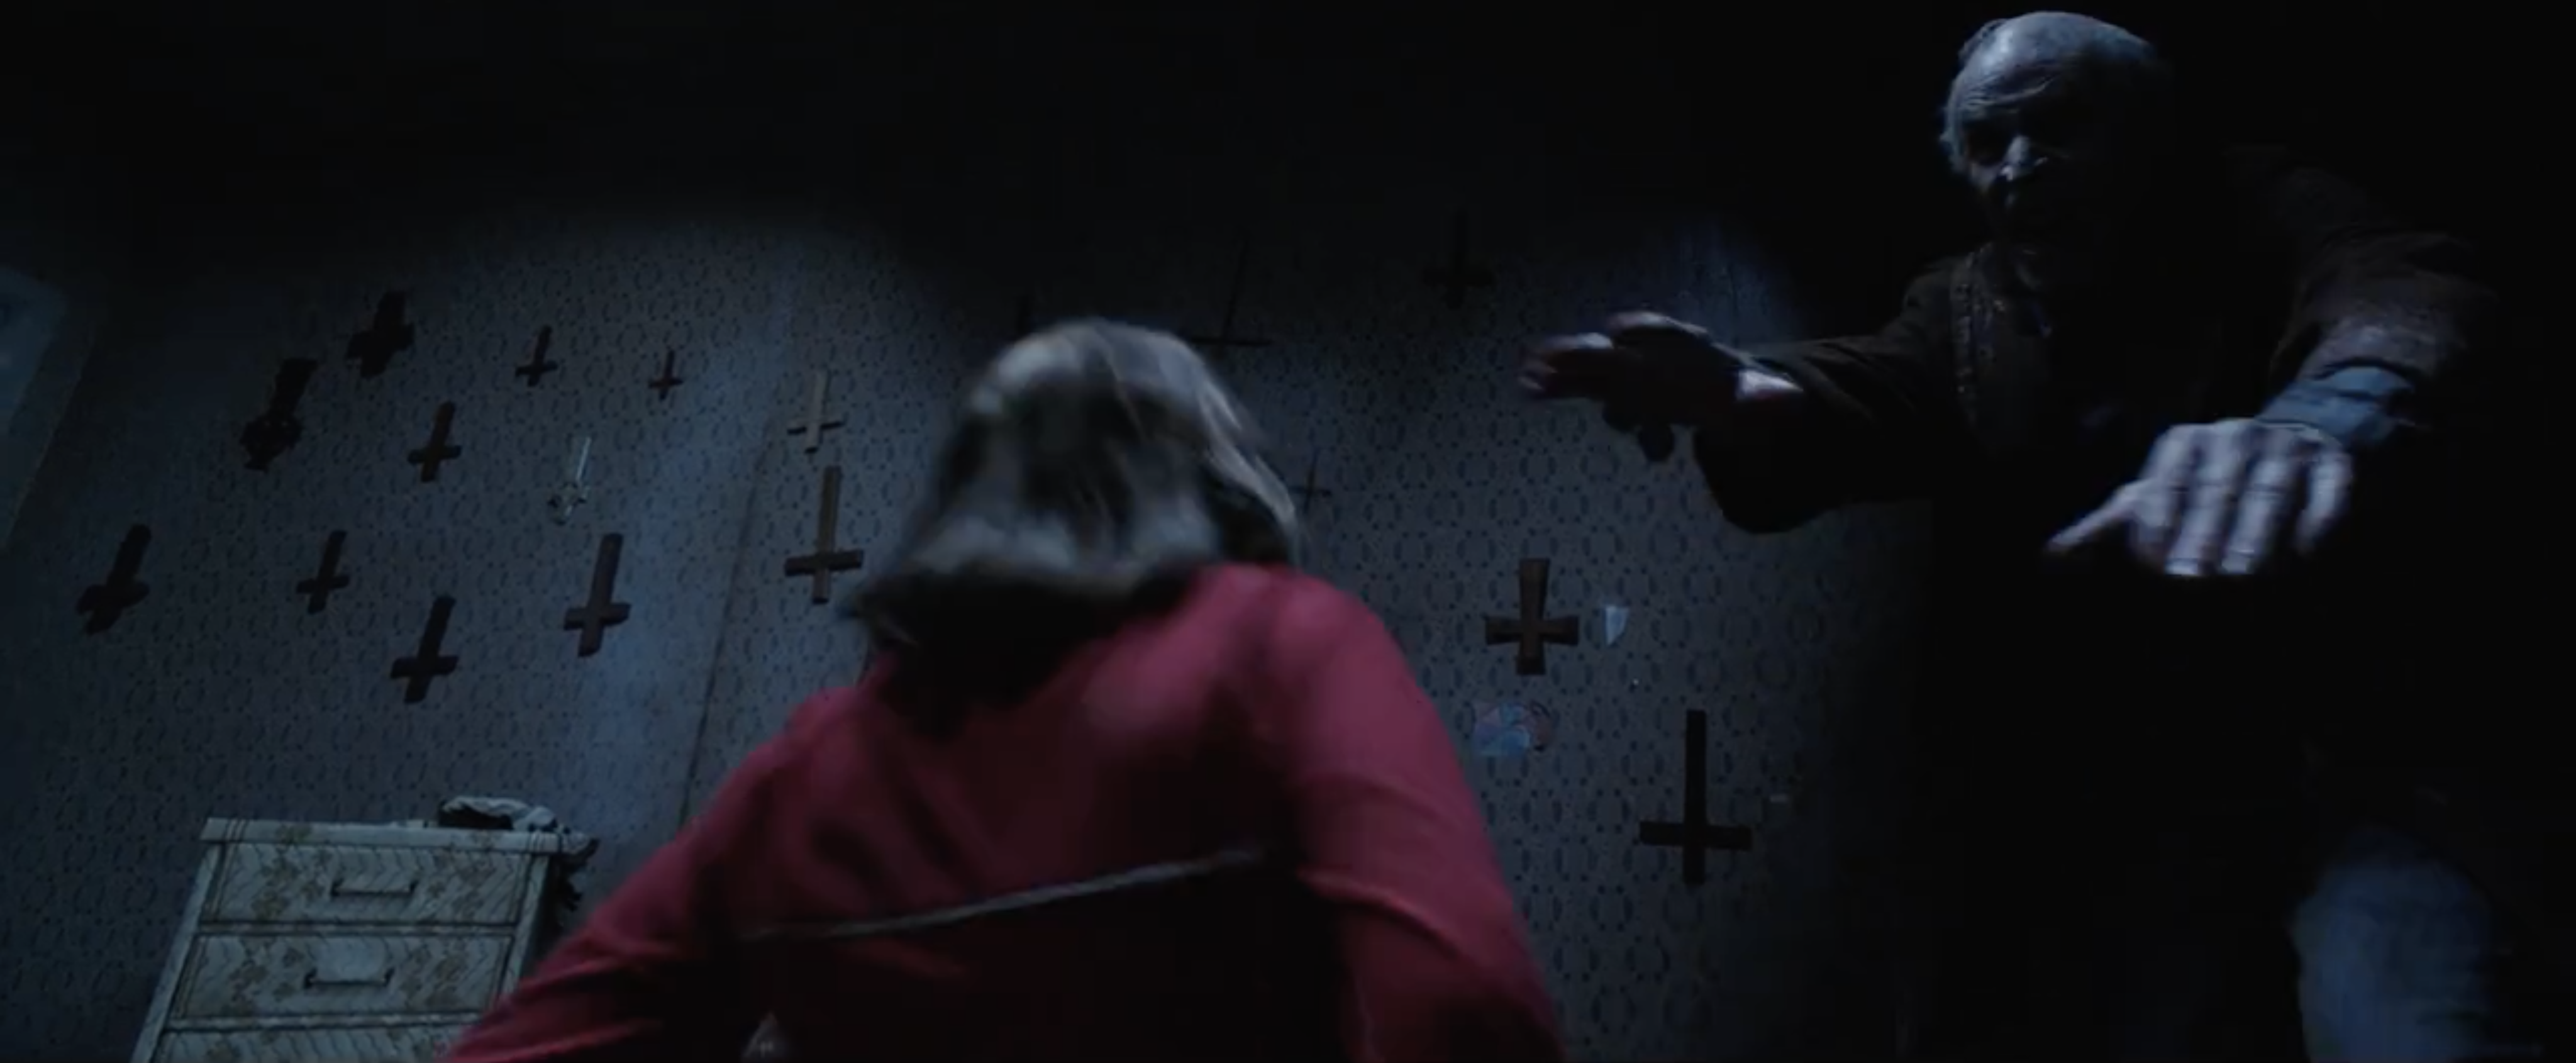 THE CONJURING 2 | image via Warner Bros. Pictures